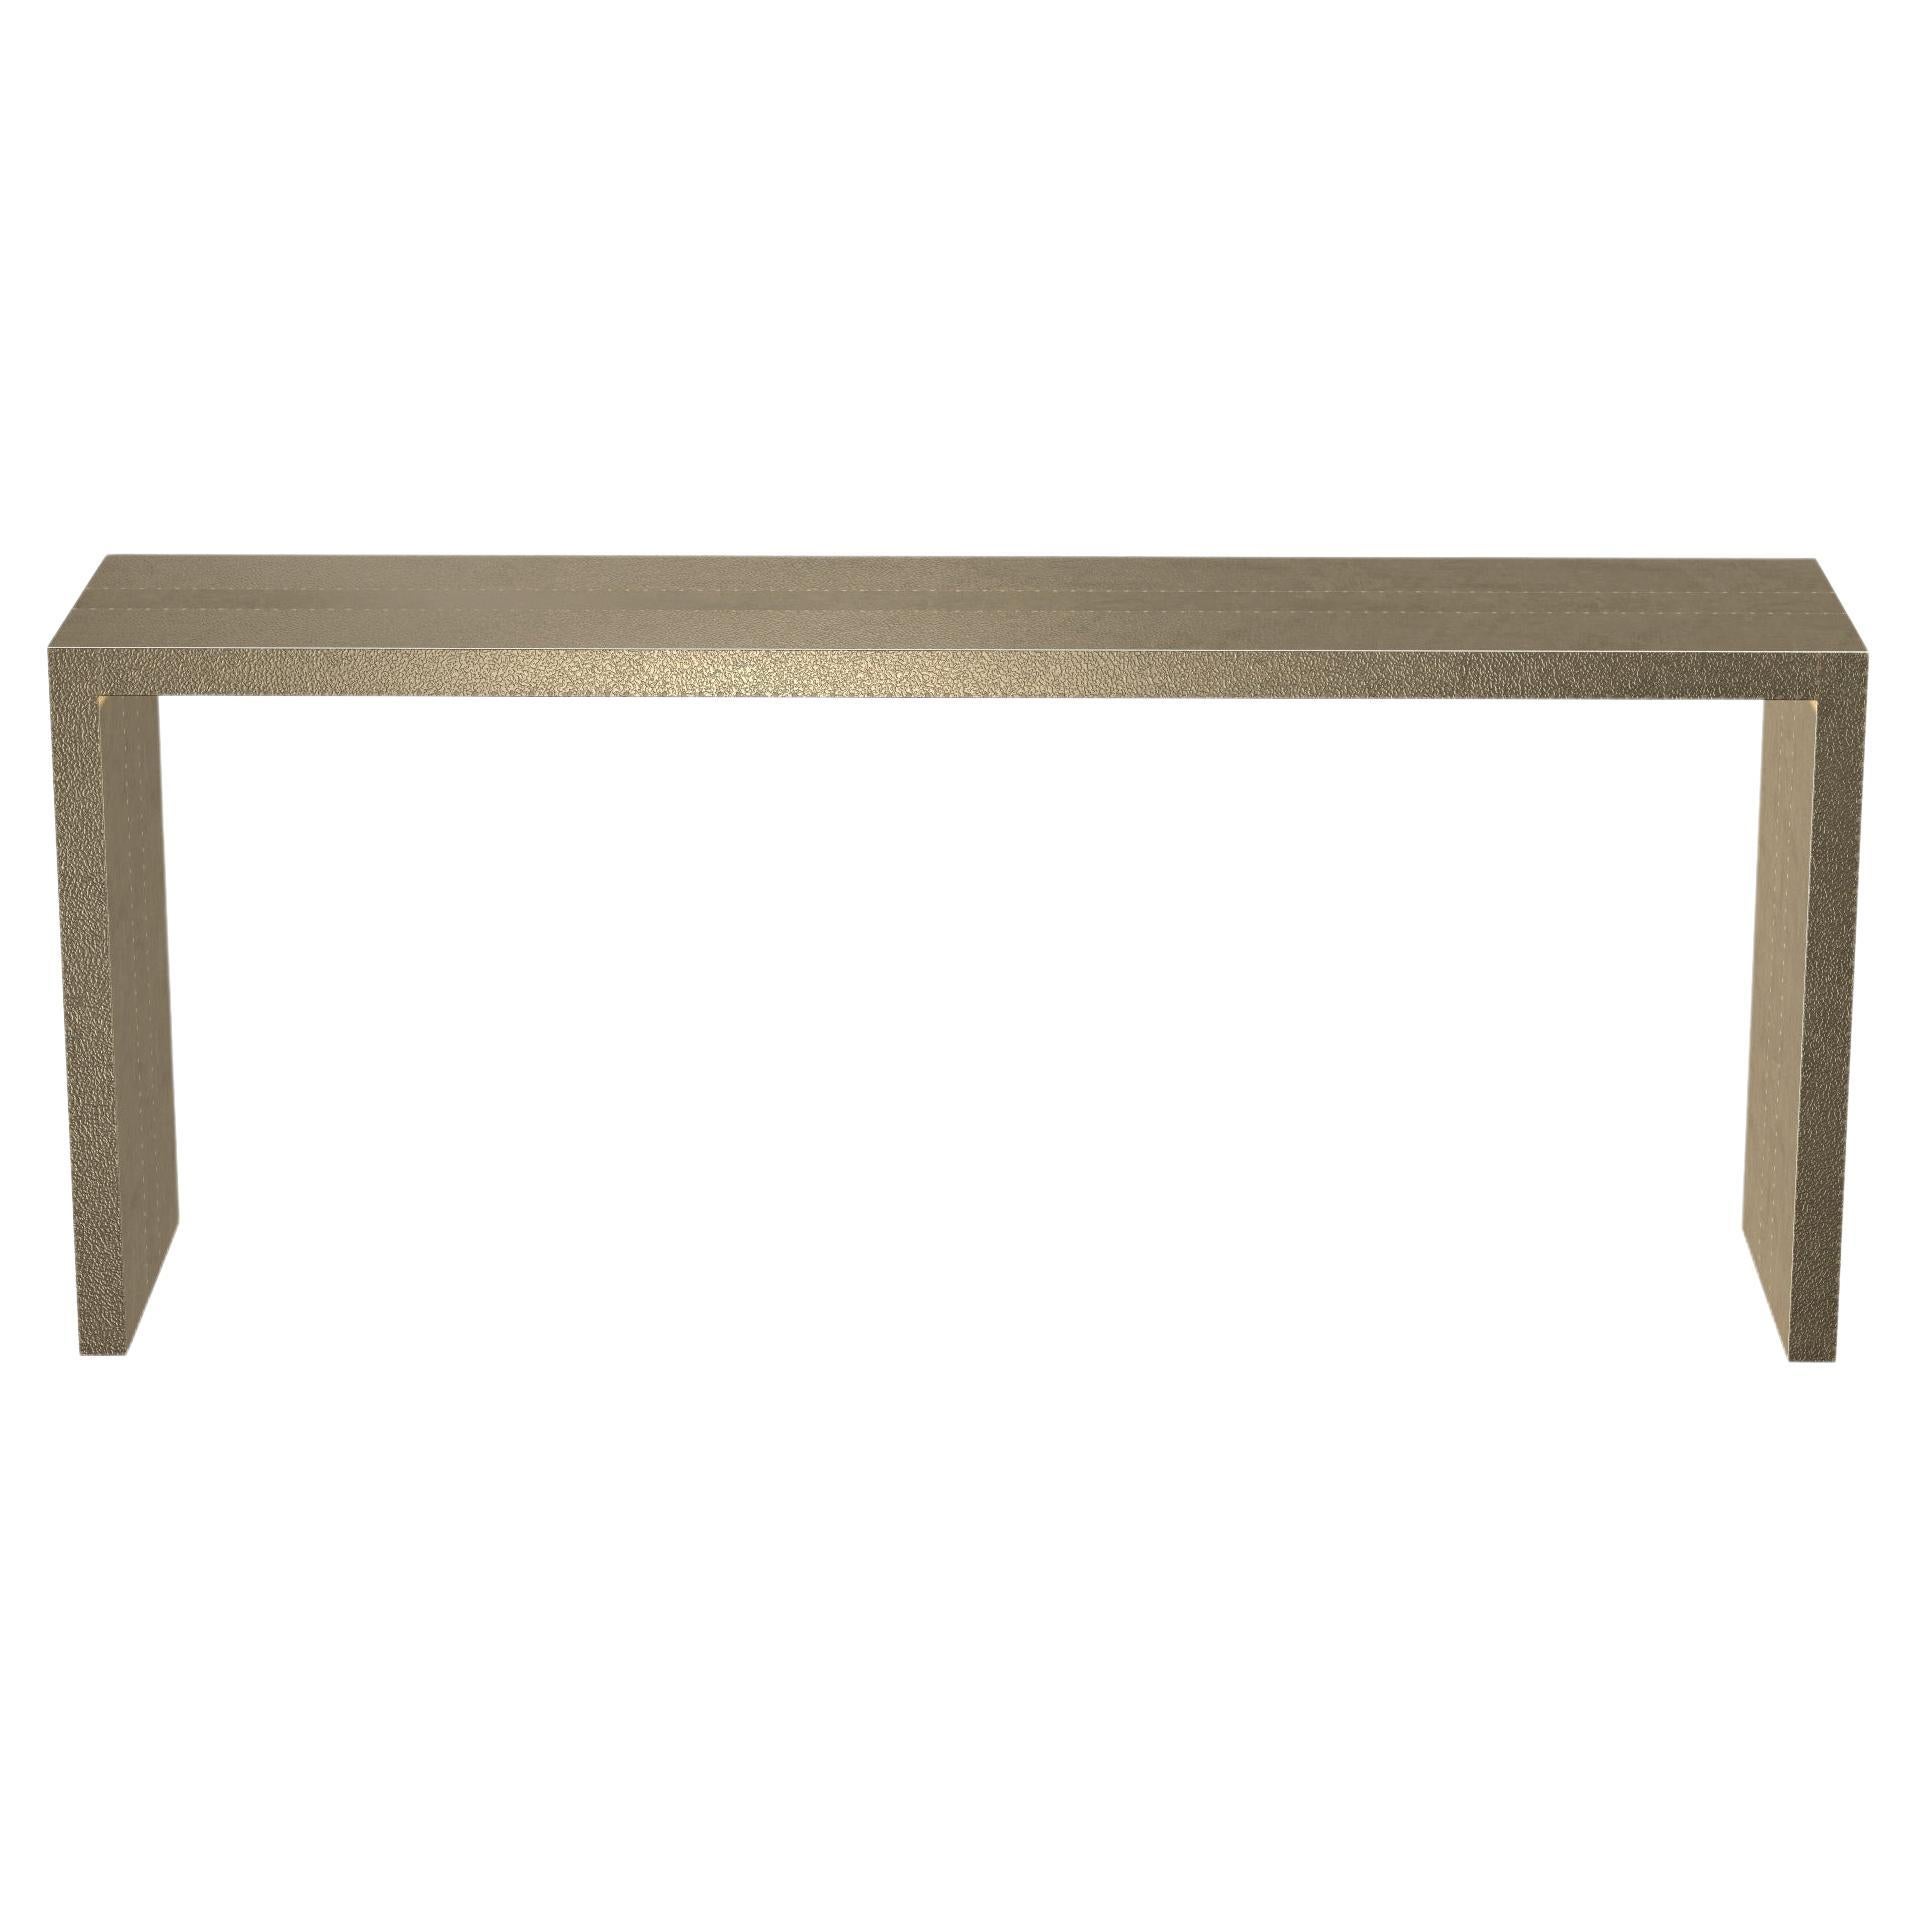 Art Deco Coffee and Cocktail Console Tables in Copper Fine Hammered  by Alison S